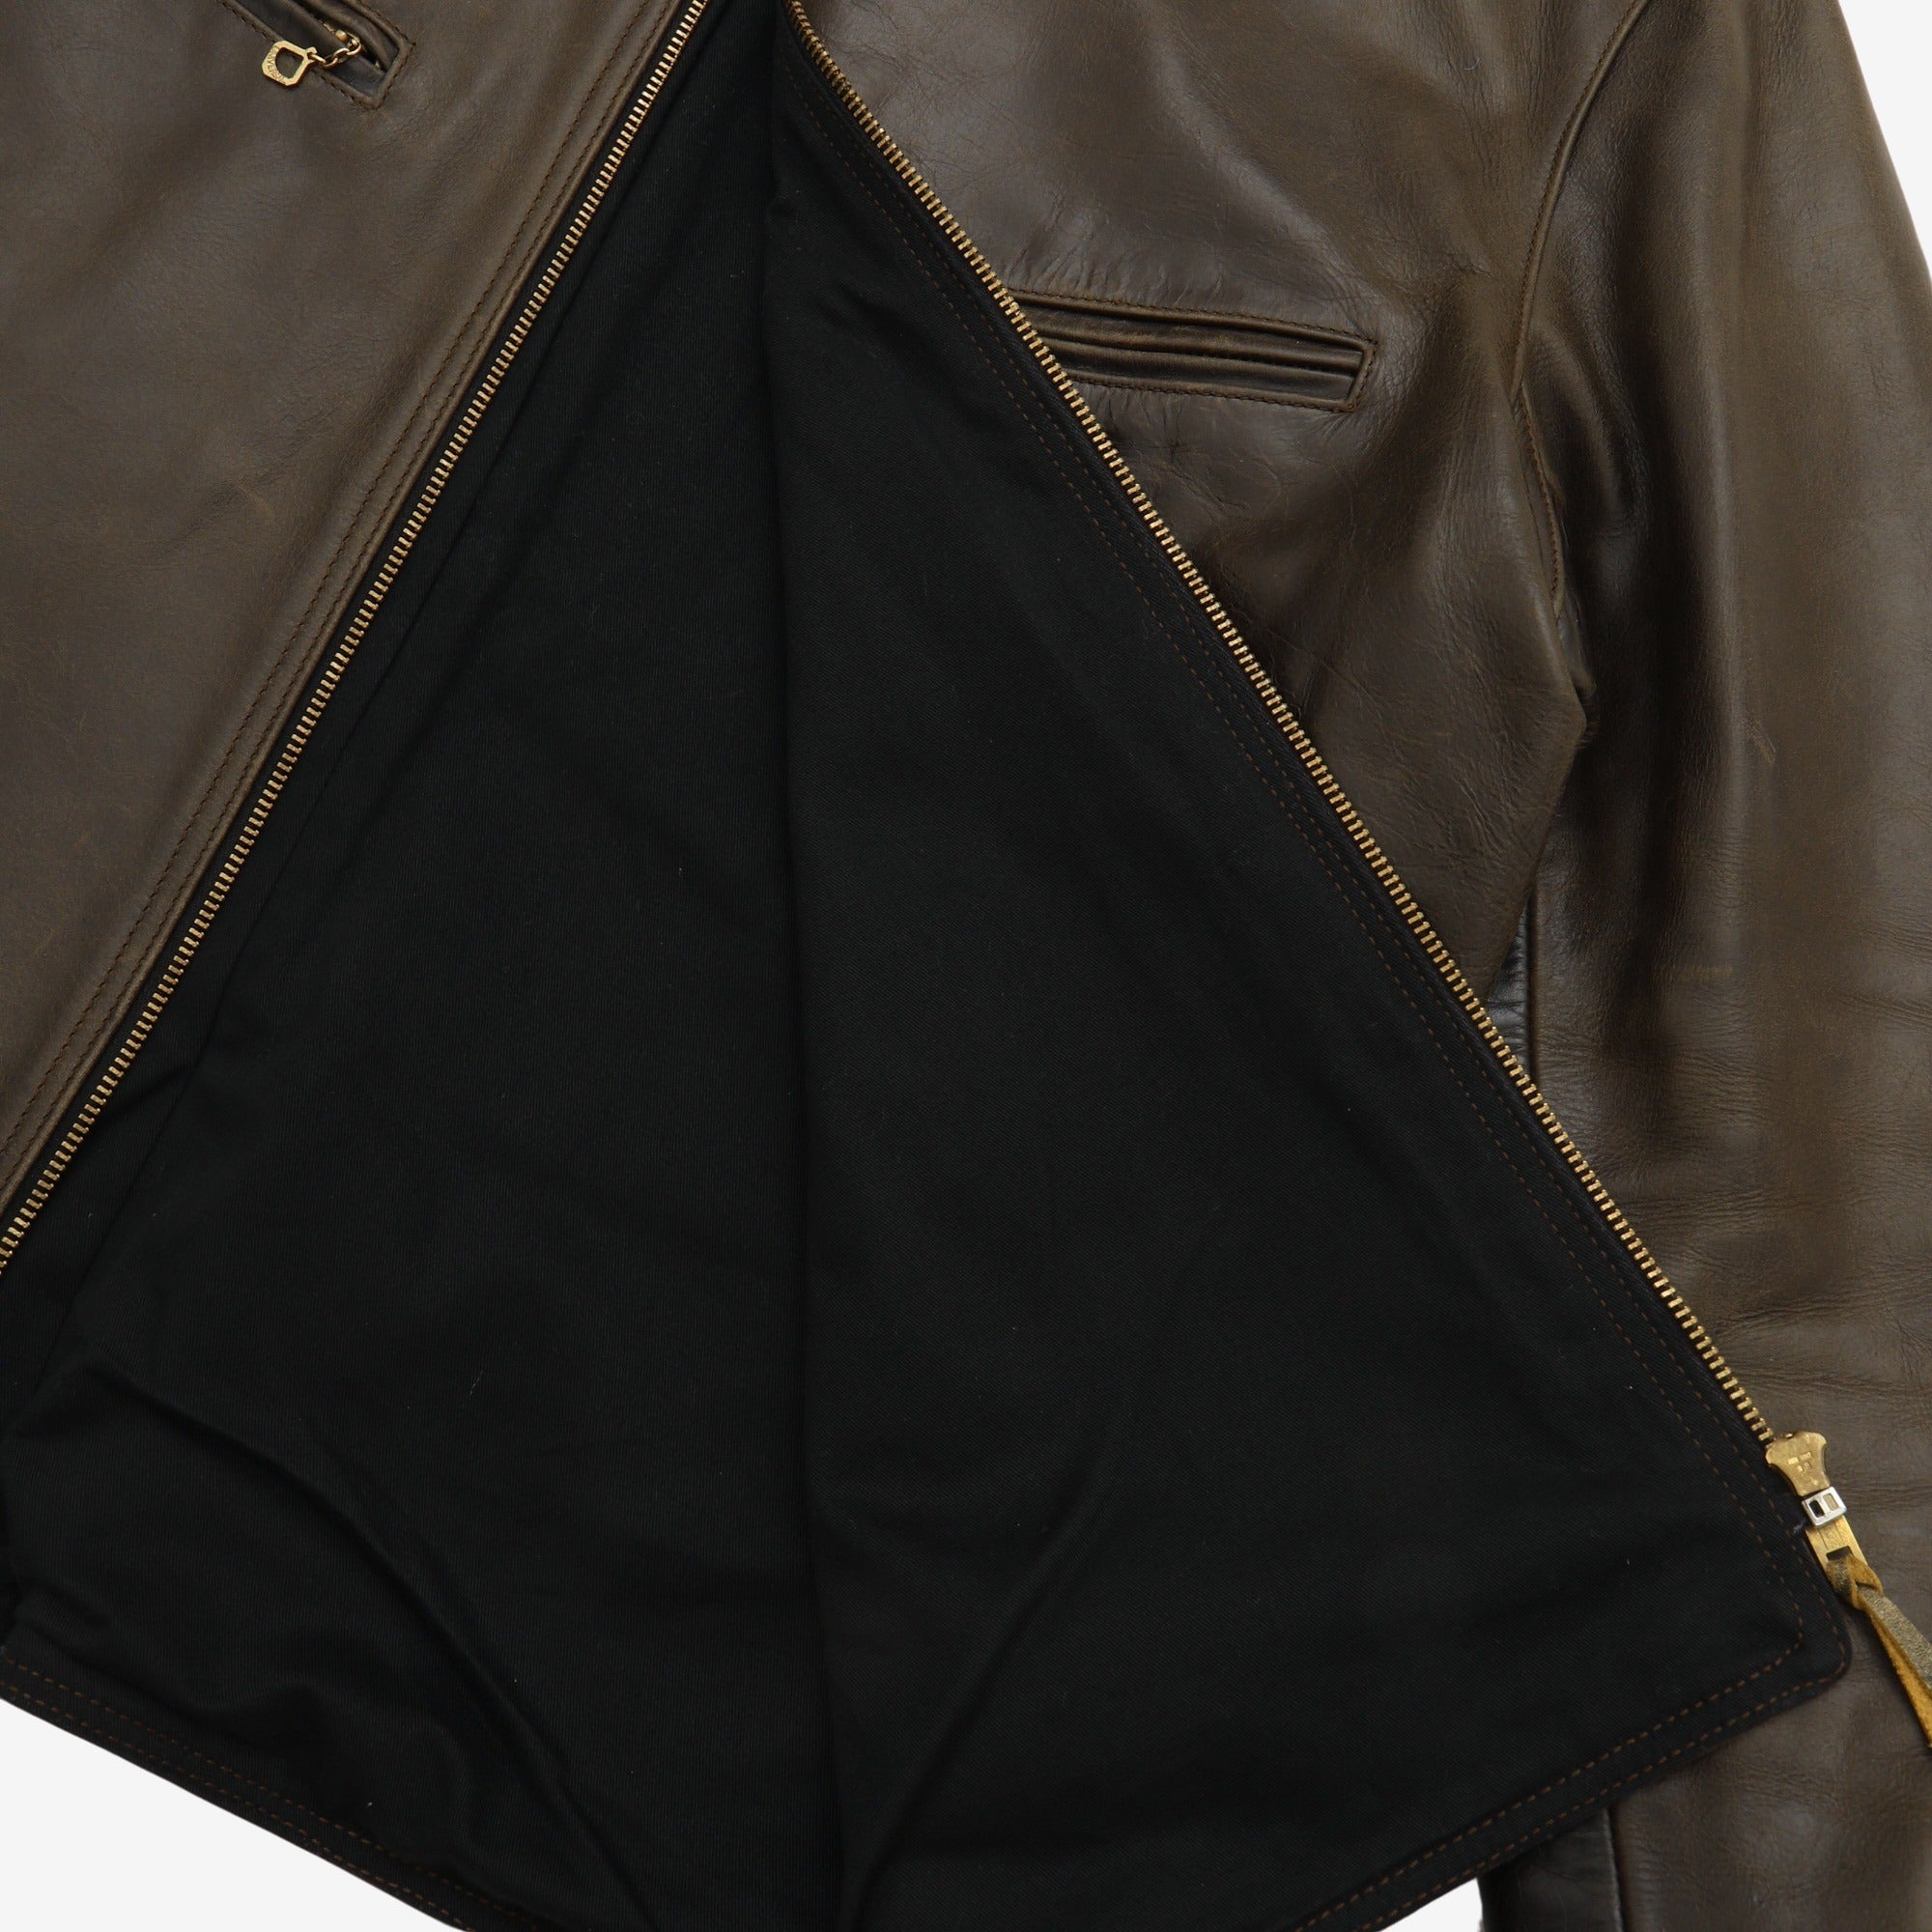 The Pinecrest Leather Jacket